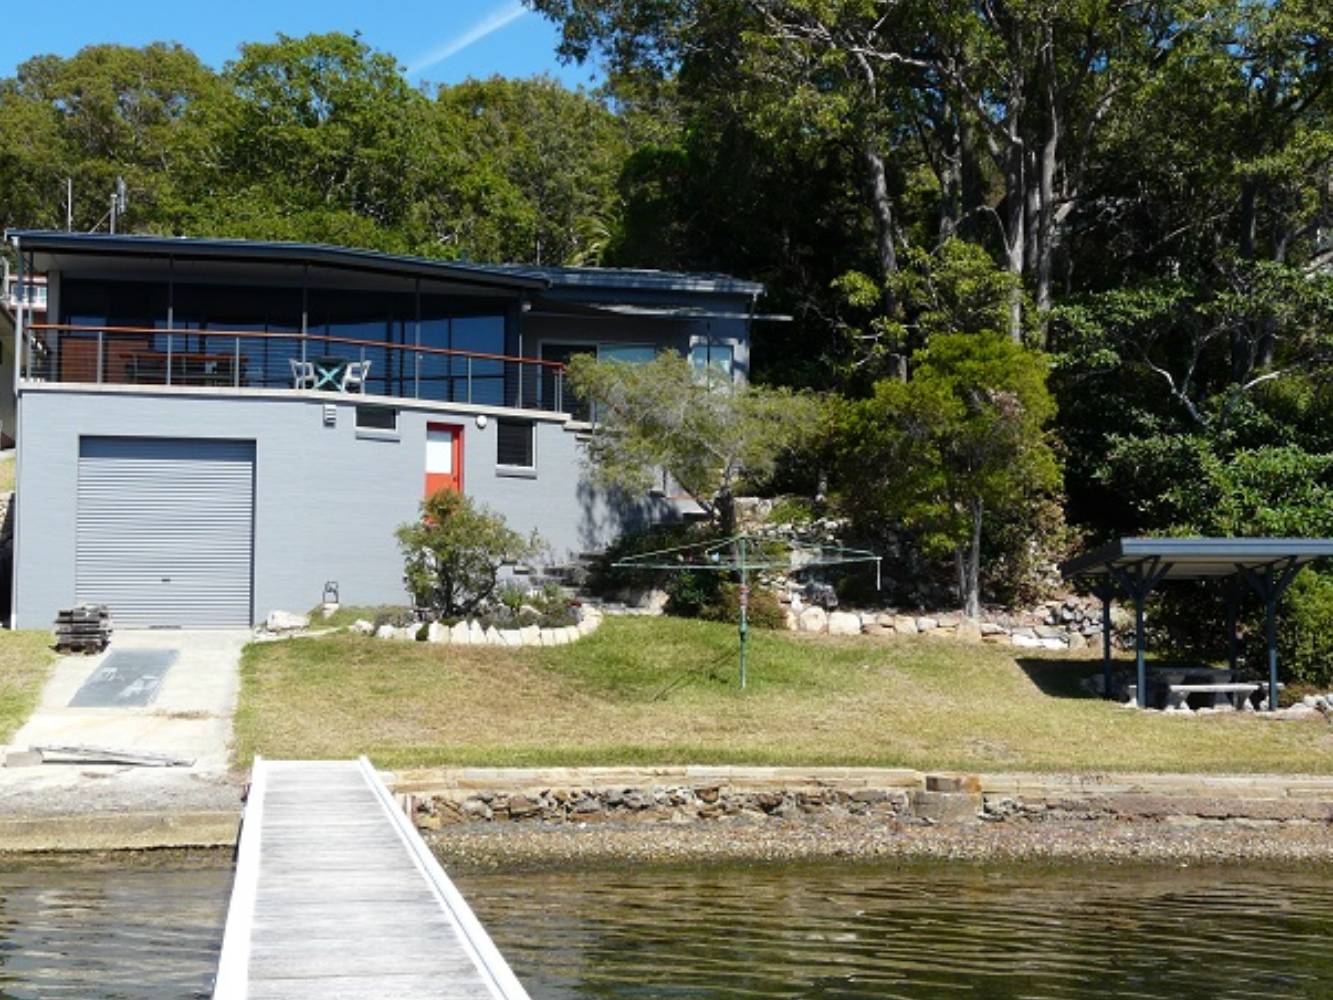 Our waterfront home from our jetty, pergola on right